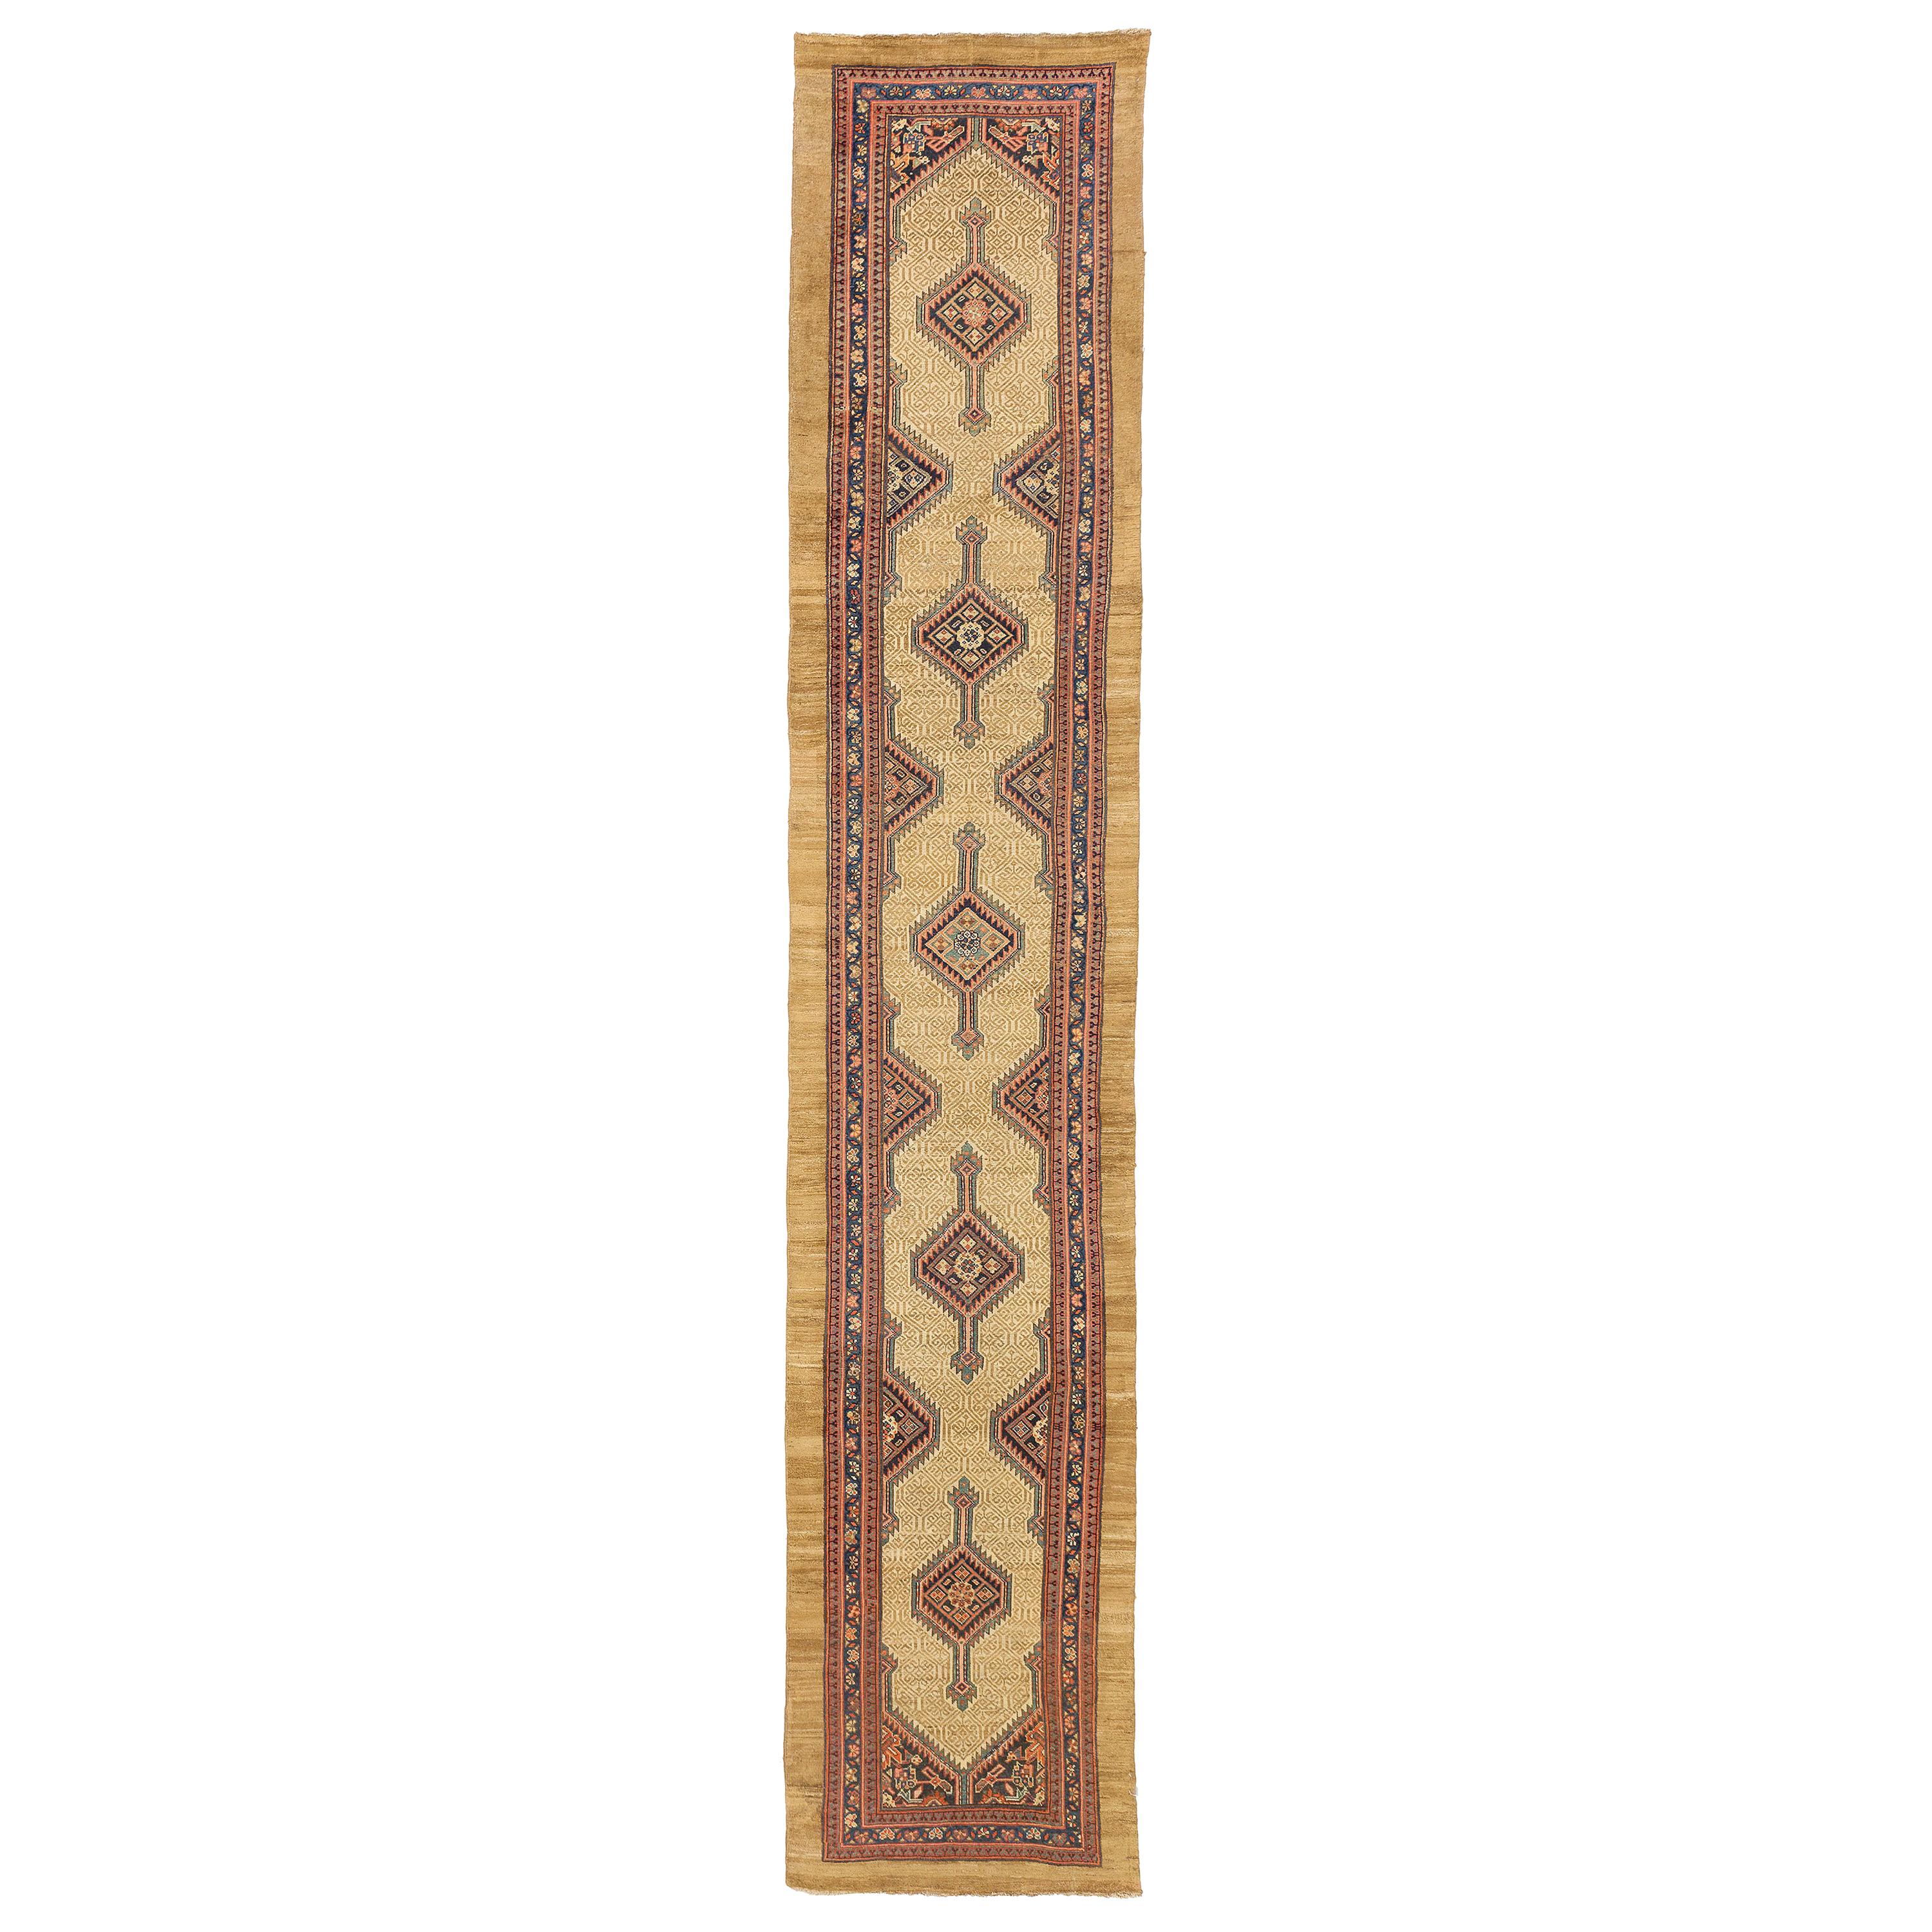 1890 Antique Persian Sarab Runner Rug with Brown and Beige Geometric Details